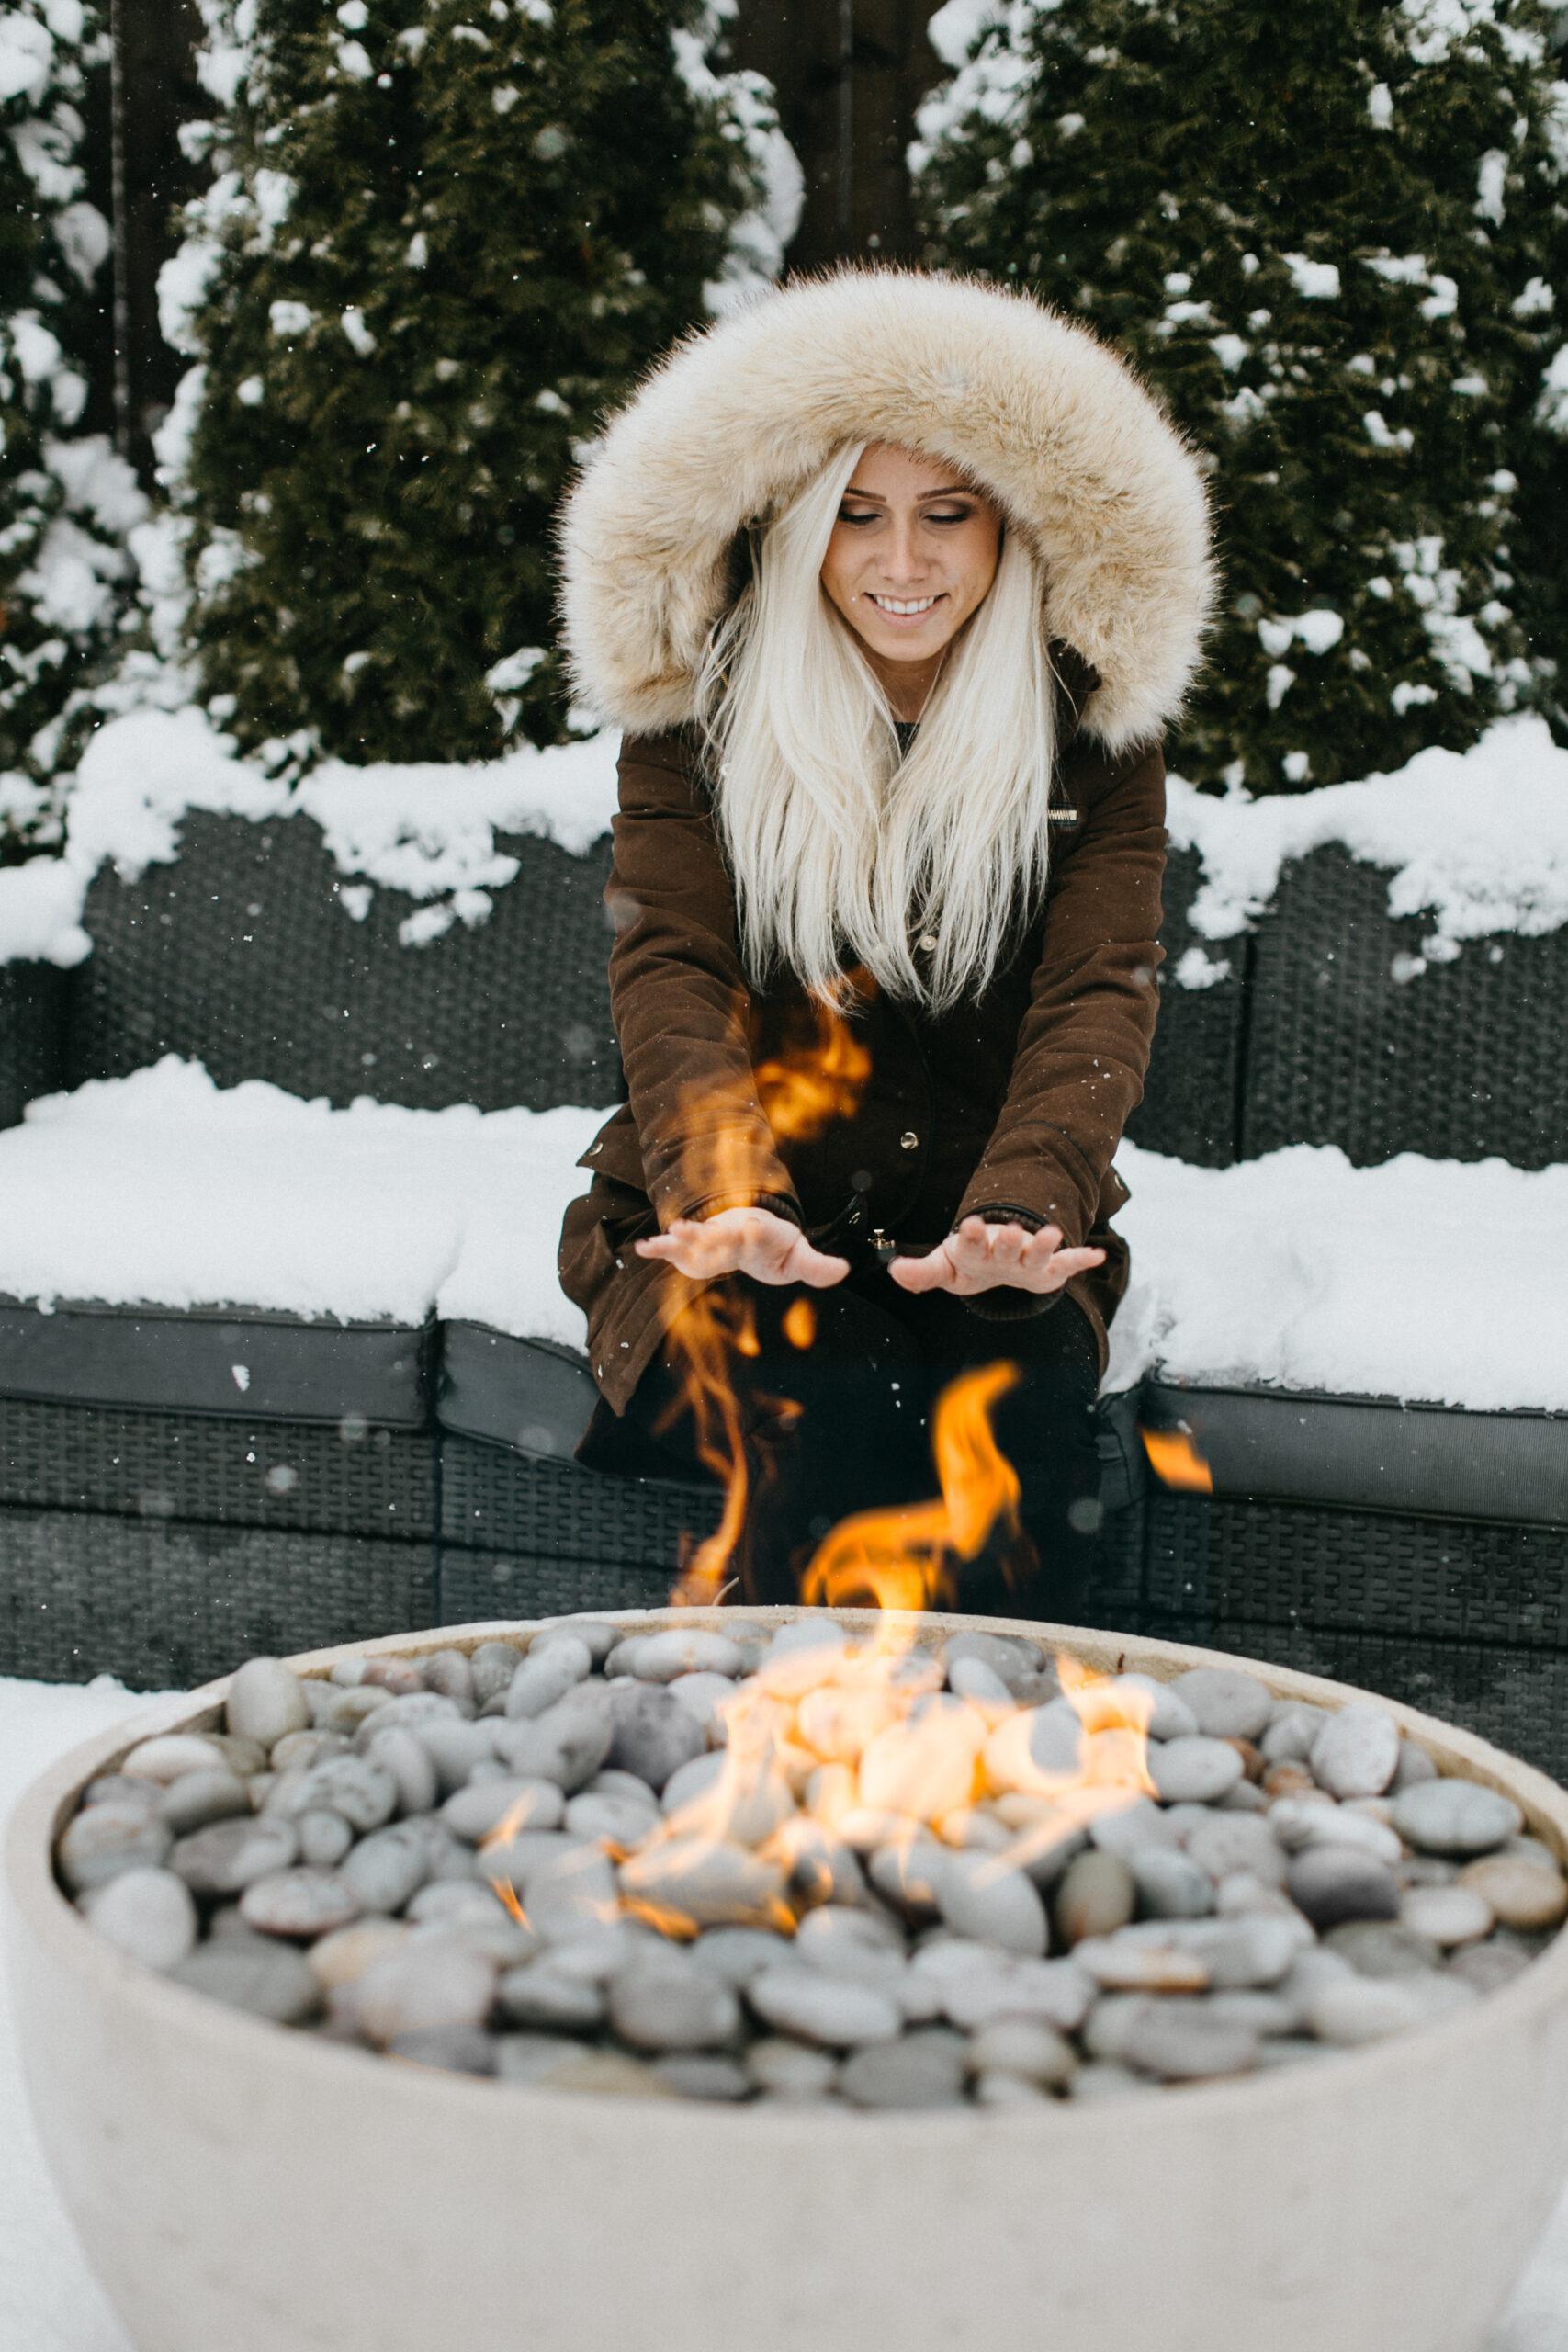 Enjoying fire table in the winter